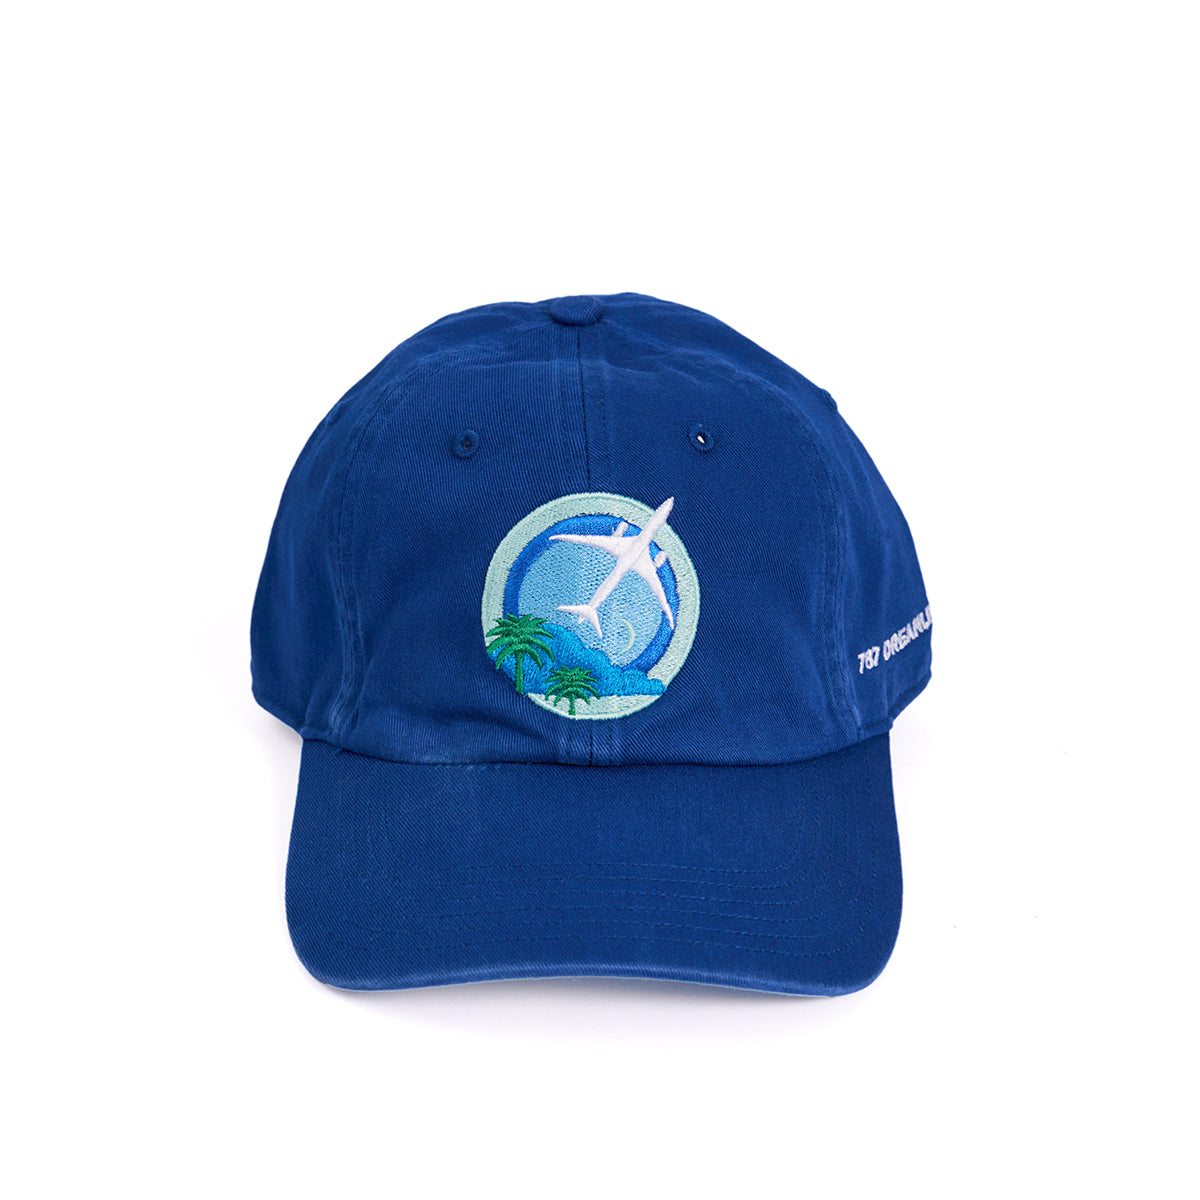 Skyward hat, featuring the iconic Boeing 787 Dreamliner embroidered in a roundel design on the front.